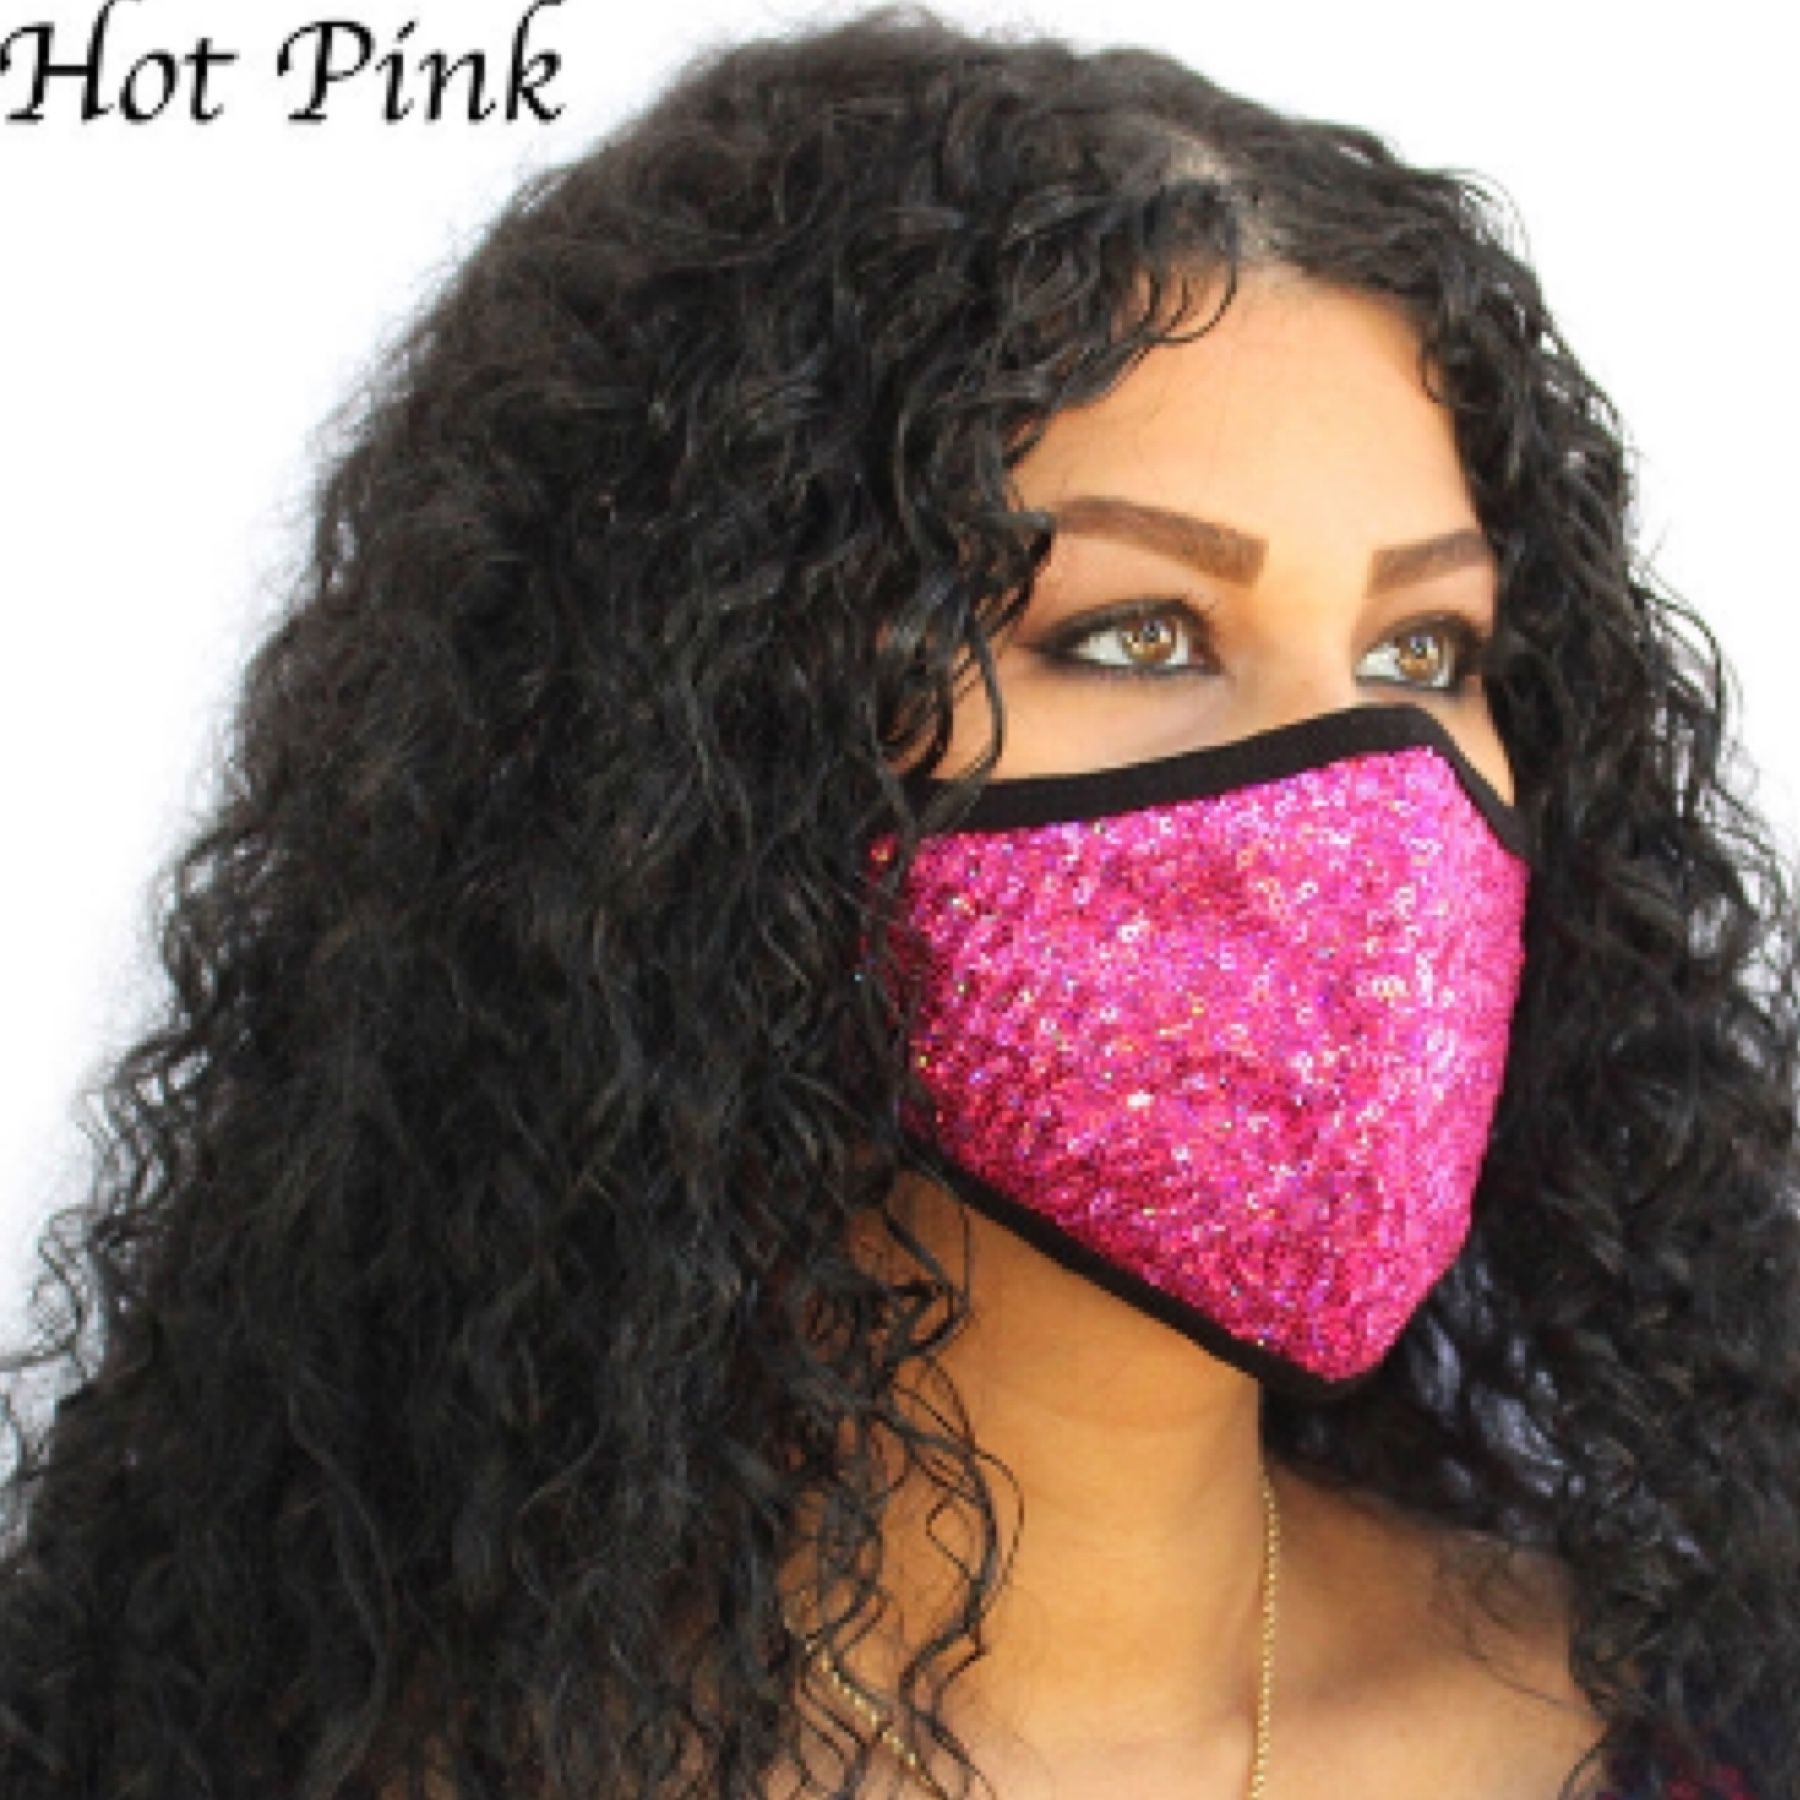 Washable hot pink face mask made in USA 🇺🇸